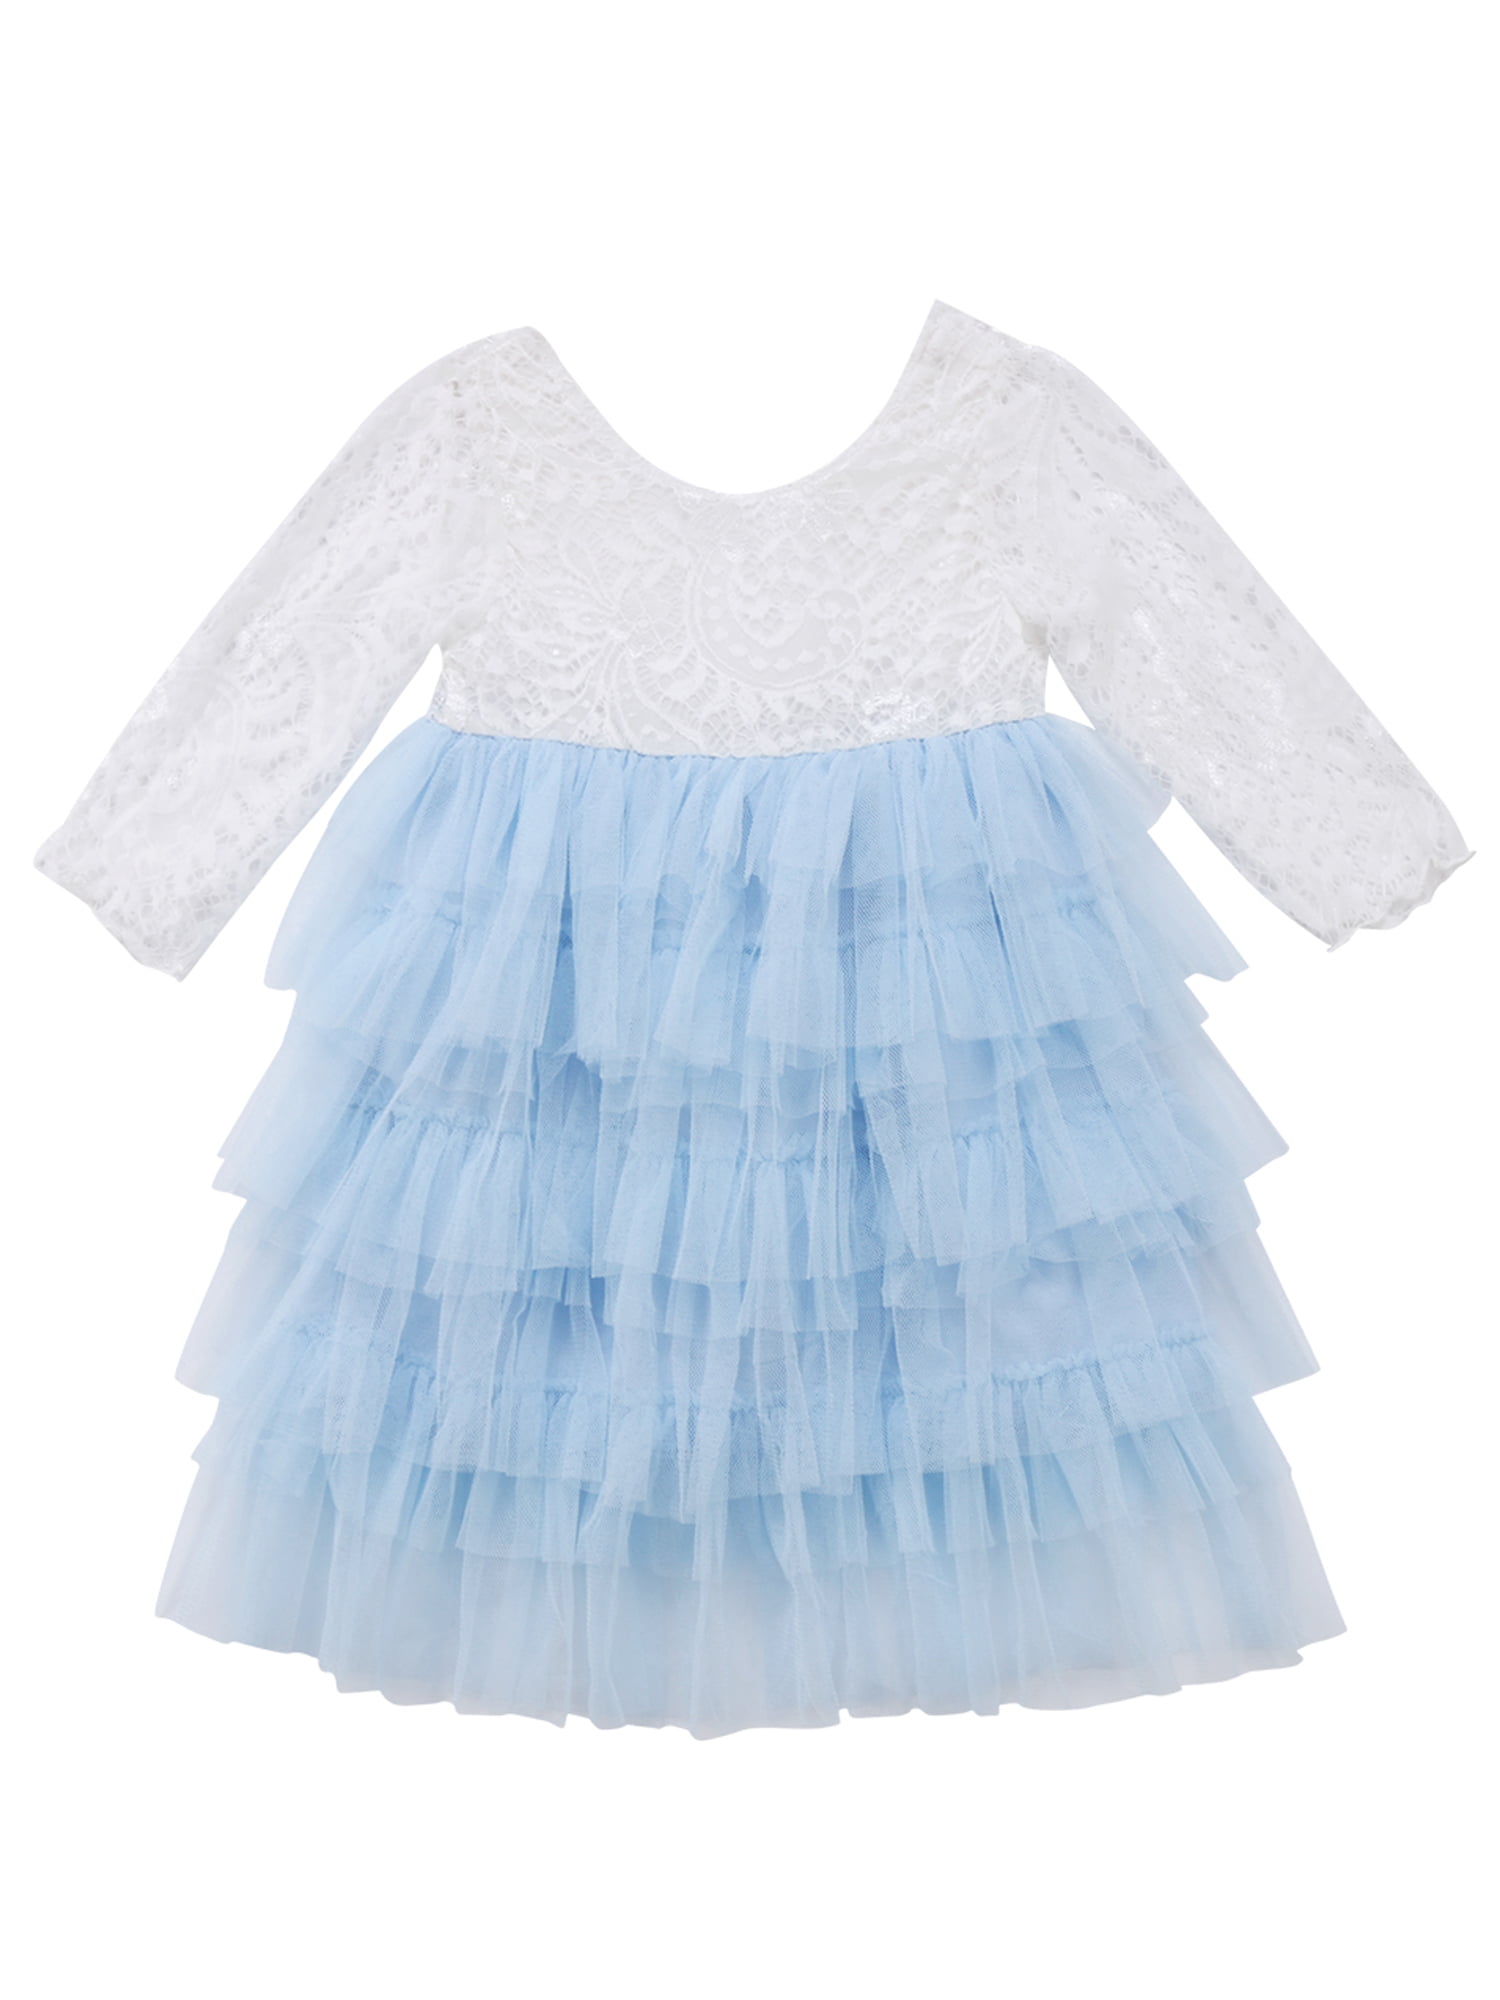 Dewadbow Kid Baby Girl Dress Party Pageant Formal Dresses Tulle Tutu ...